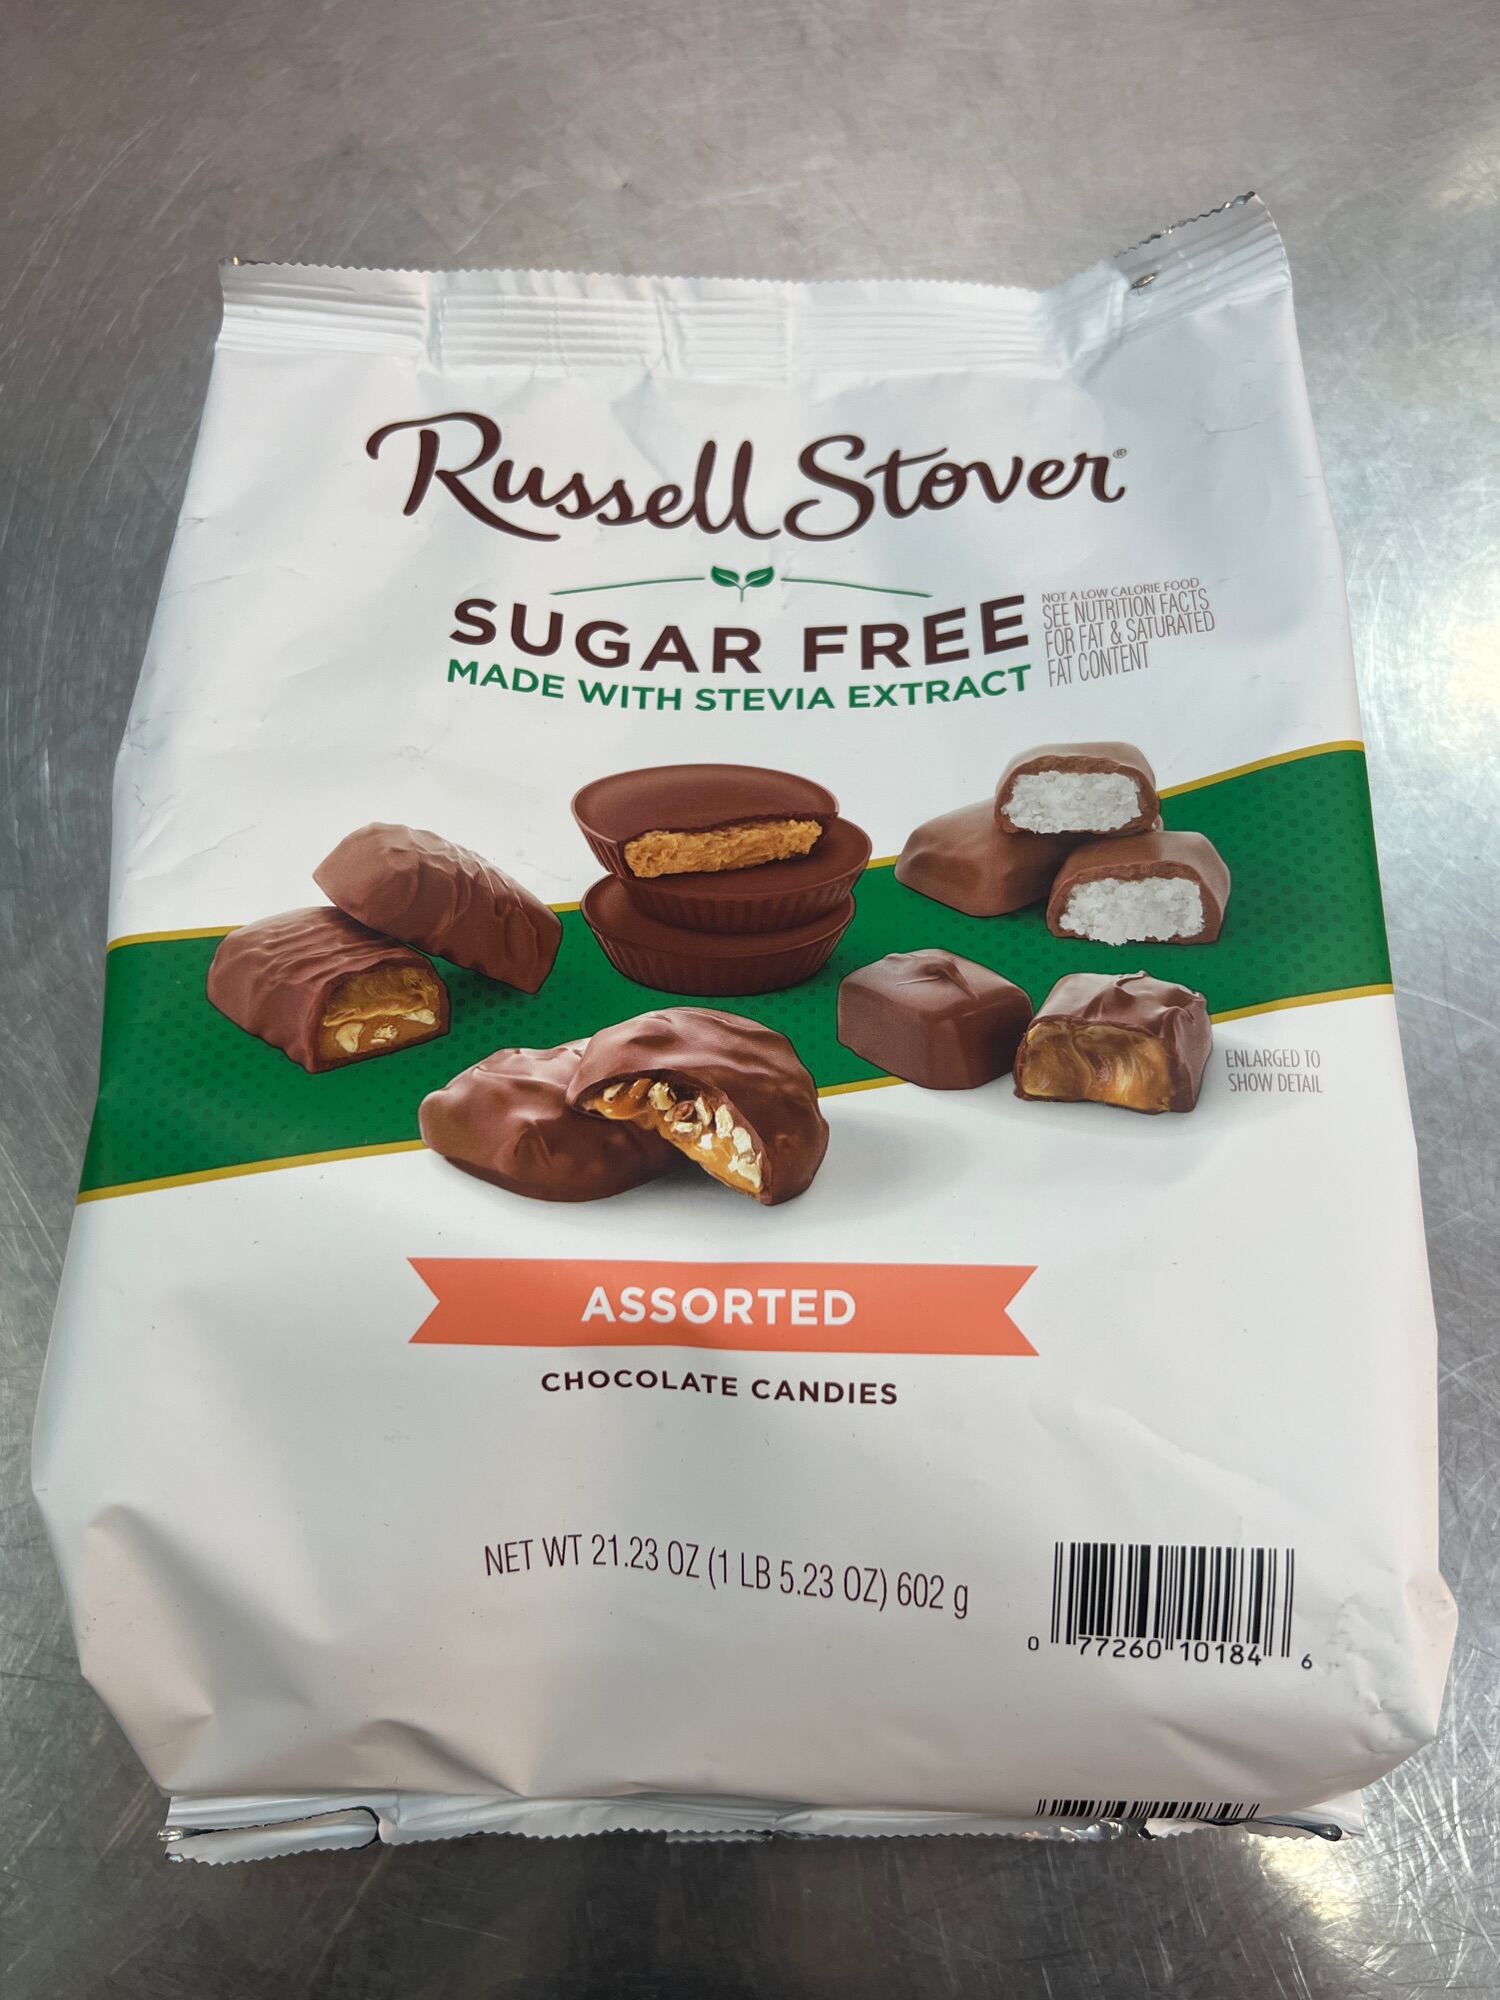 Chocolate Sugar Free Russell Stover - TL 602g 38 Pieces - Sản Xuất tại Mỹ